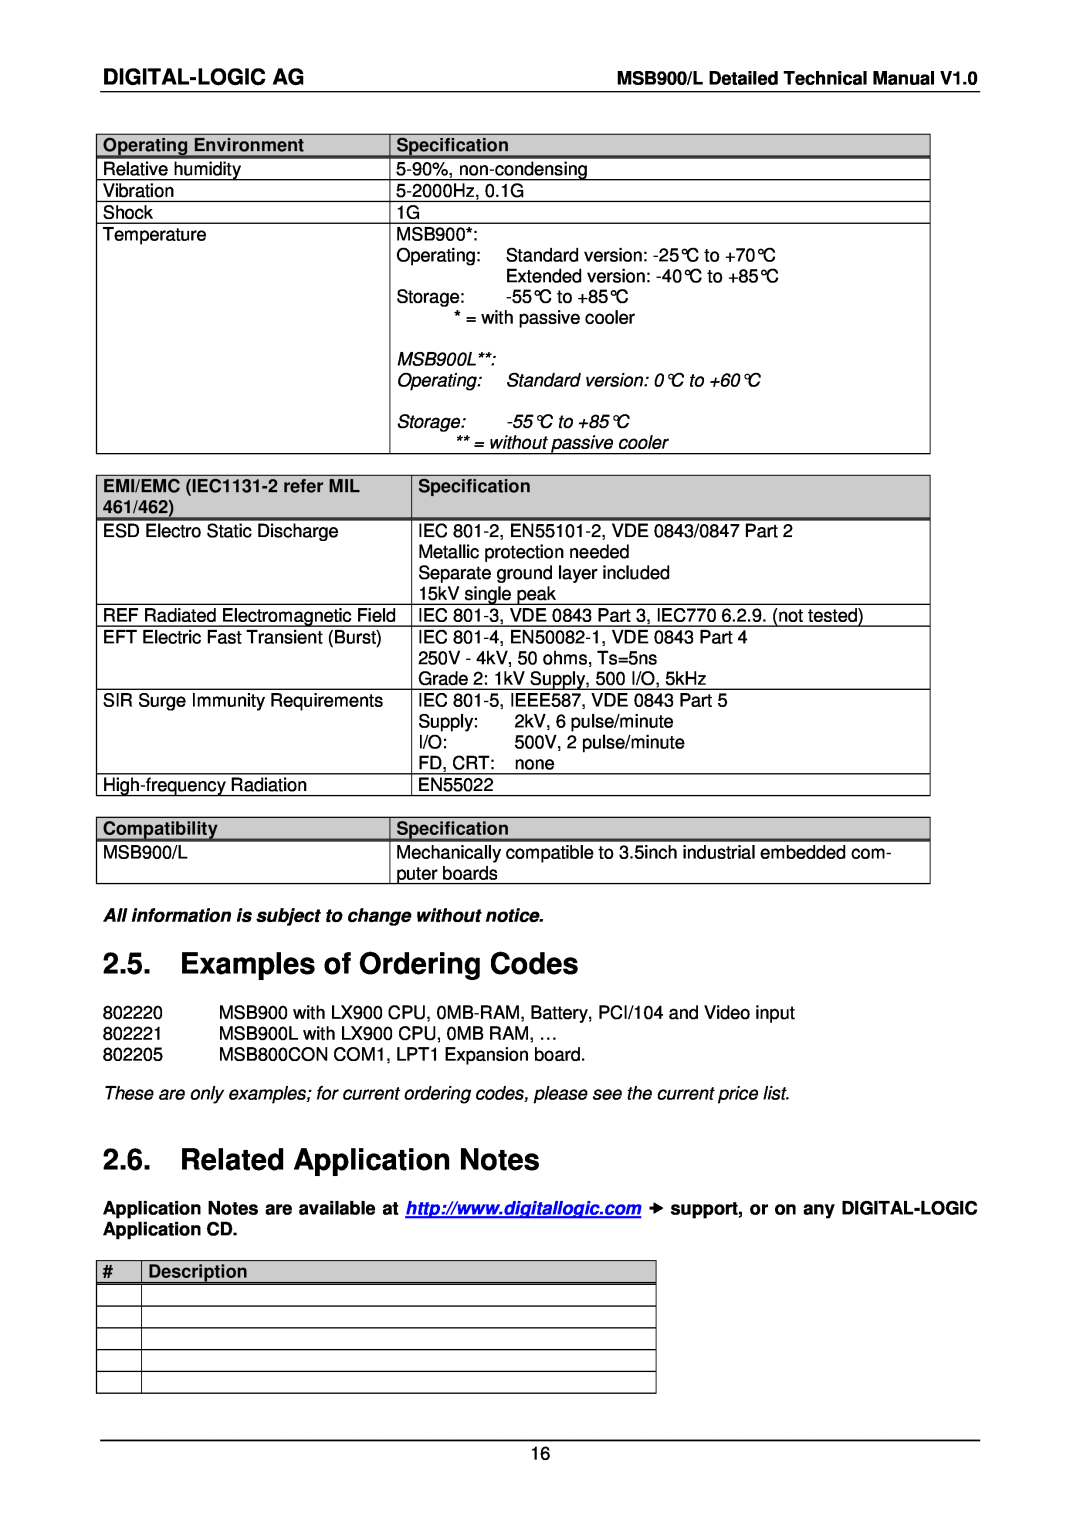 Compaq MSB900L user manual Examples of Ordering Codes, Related Application Notes, Digital-Logic Ag 